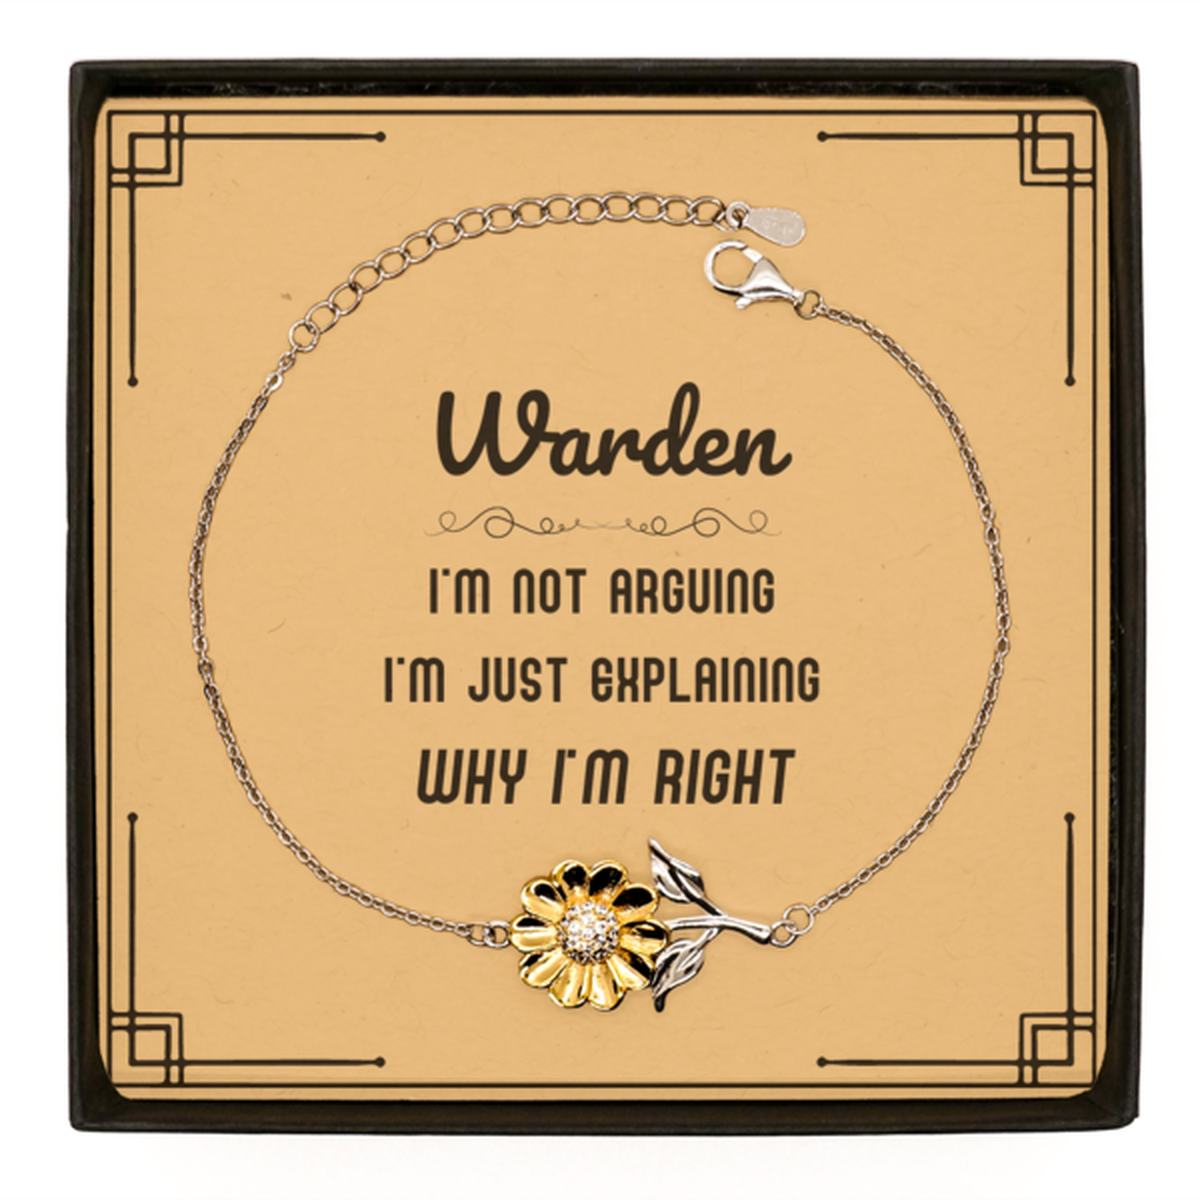 Warden I'm not Arguing. I'm Just Explaining Why I'm RIGHT Sunflower Bracelet, Funny Saying Quote Warden Gifts For Warden Message Card Graduation Birthday Christmas Gifts for Men Women Coworker